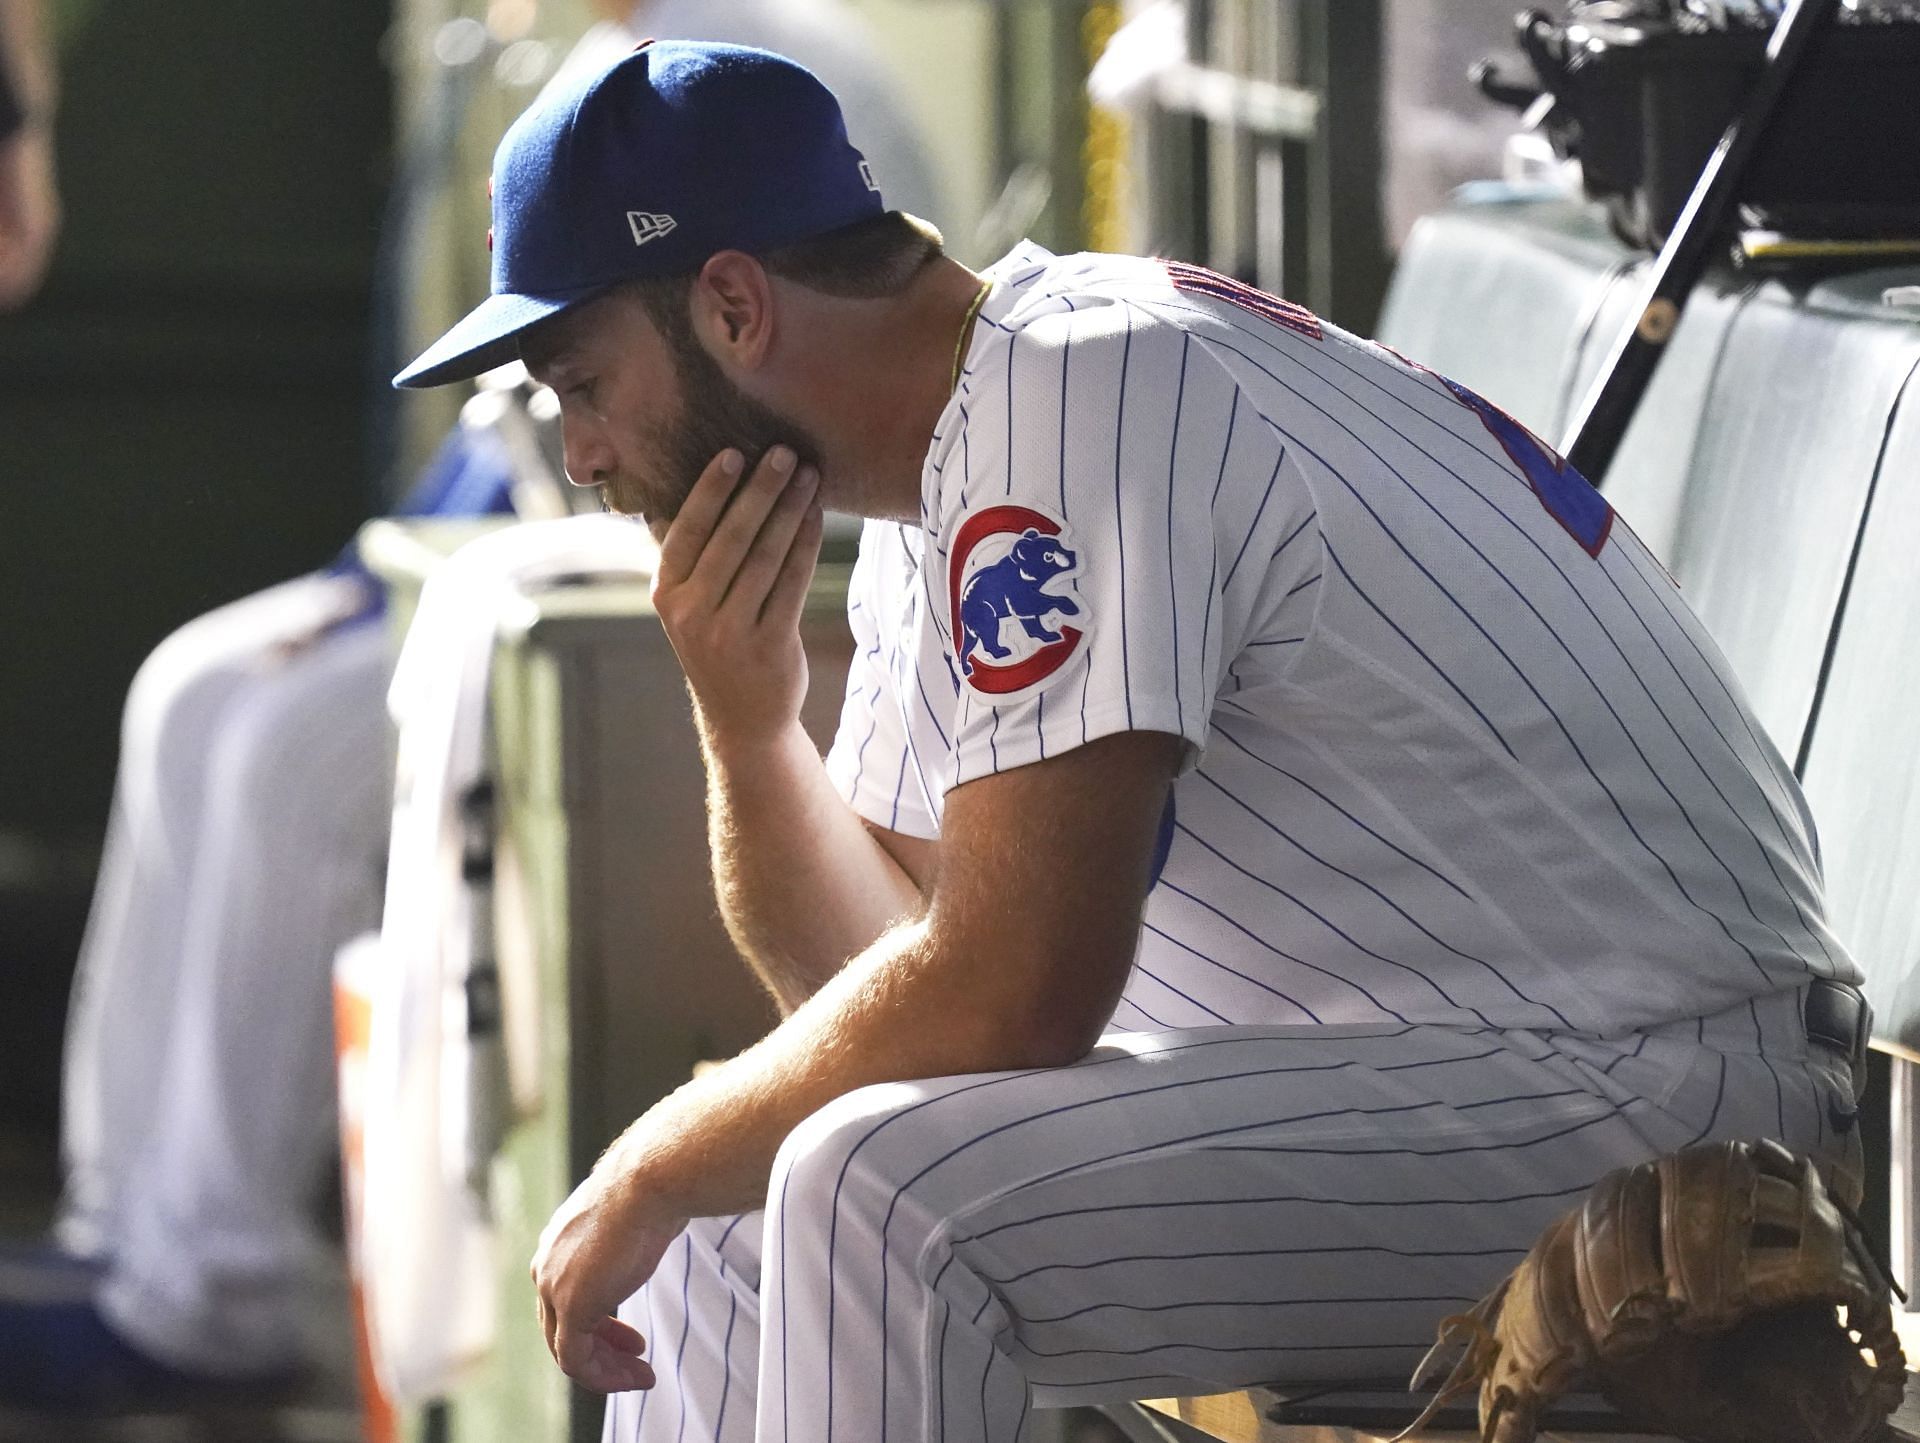 The Cubs downward spiral has to end at some point.